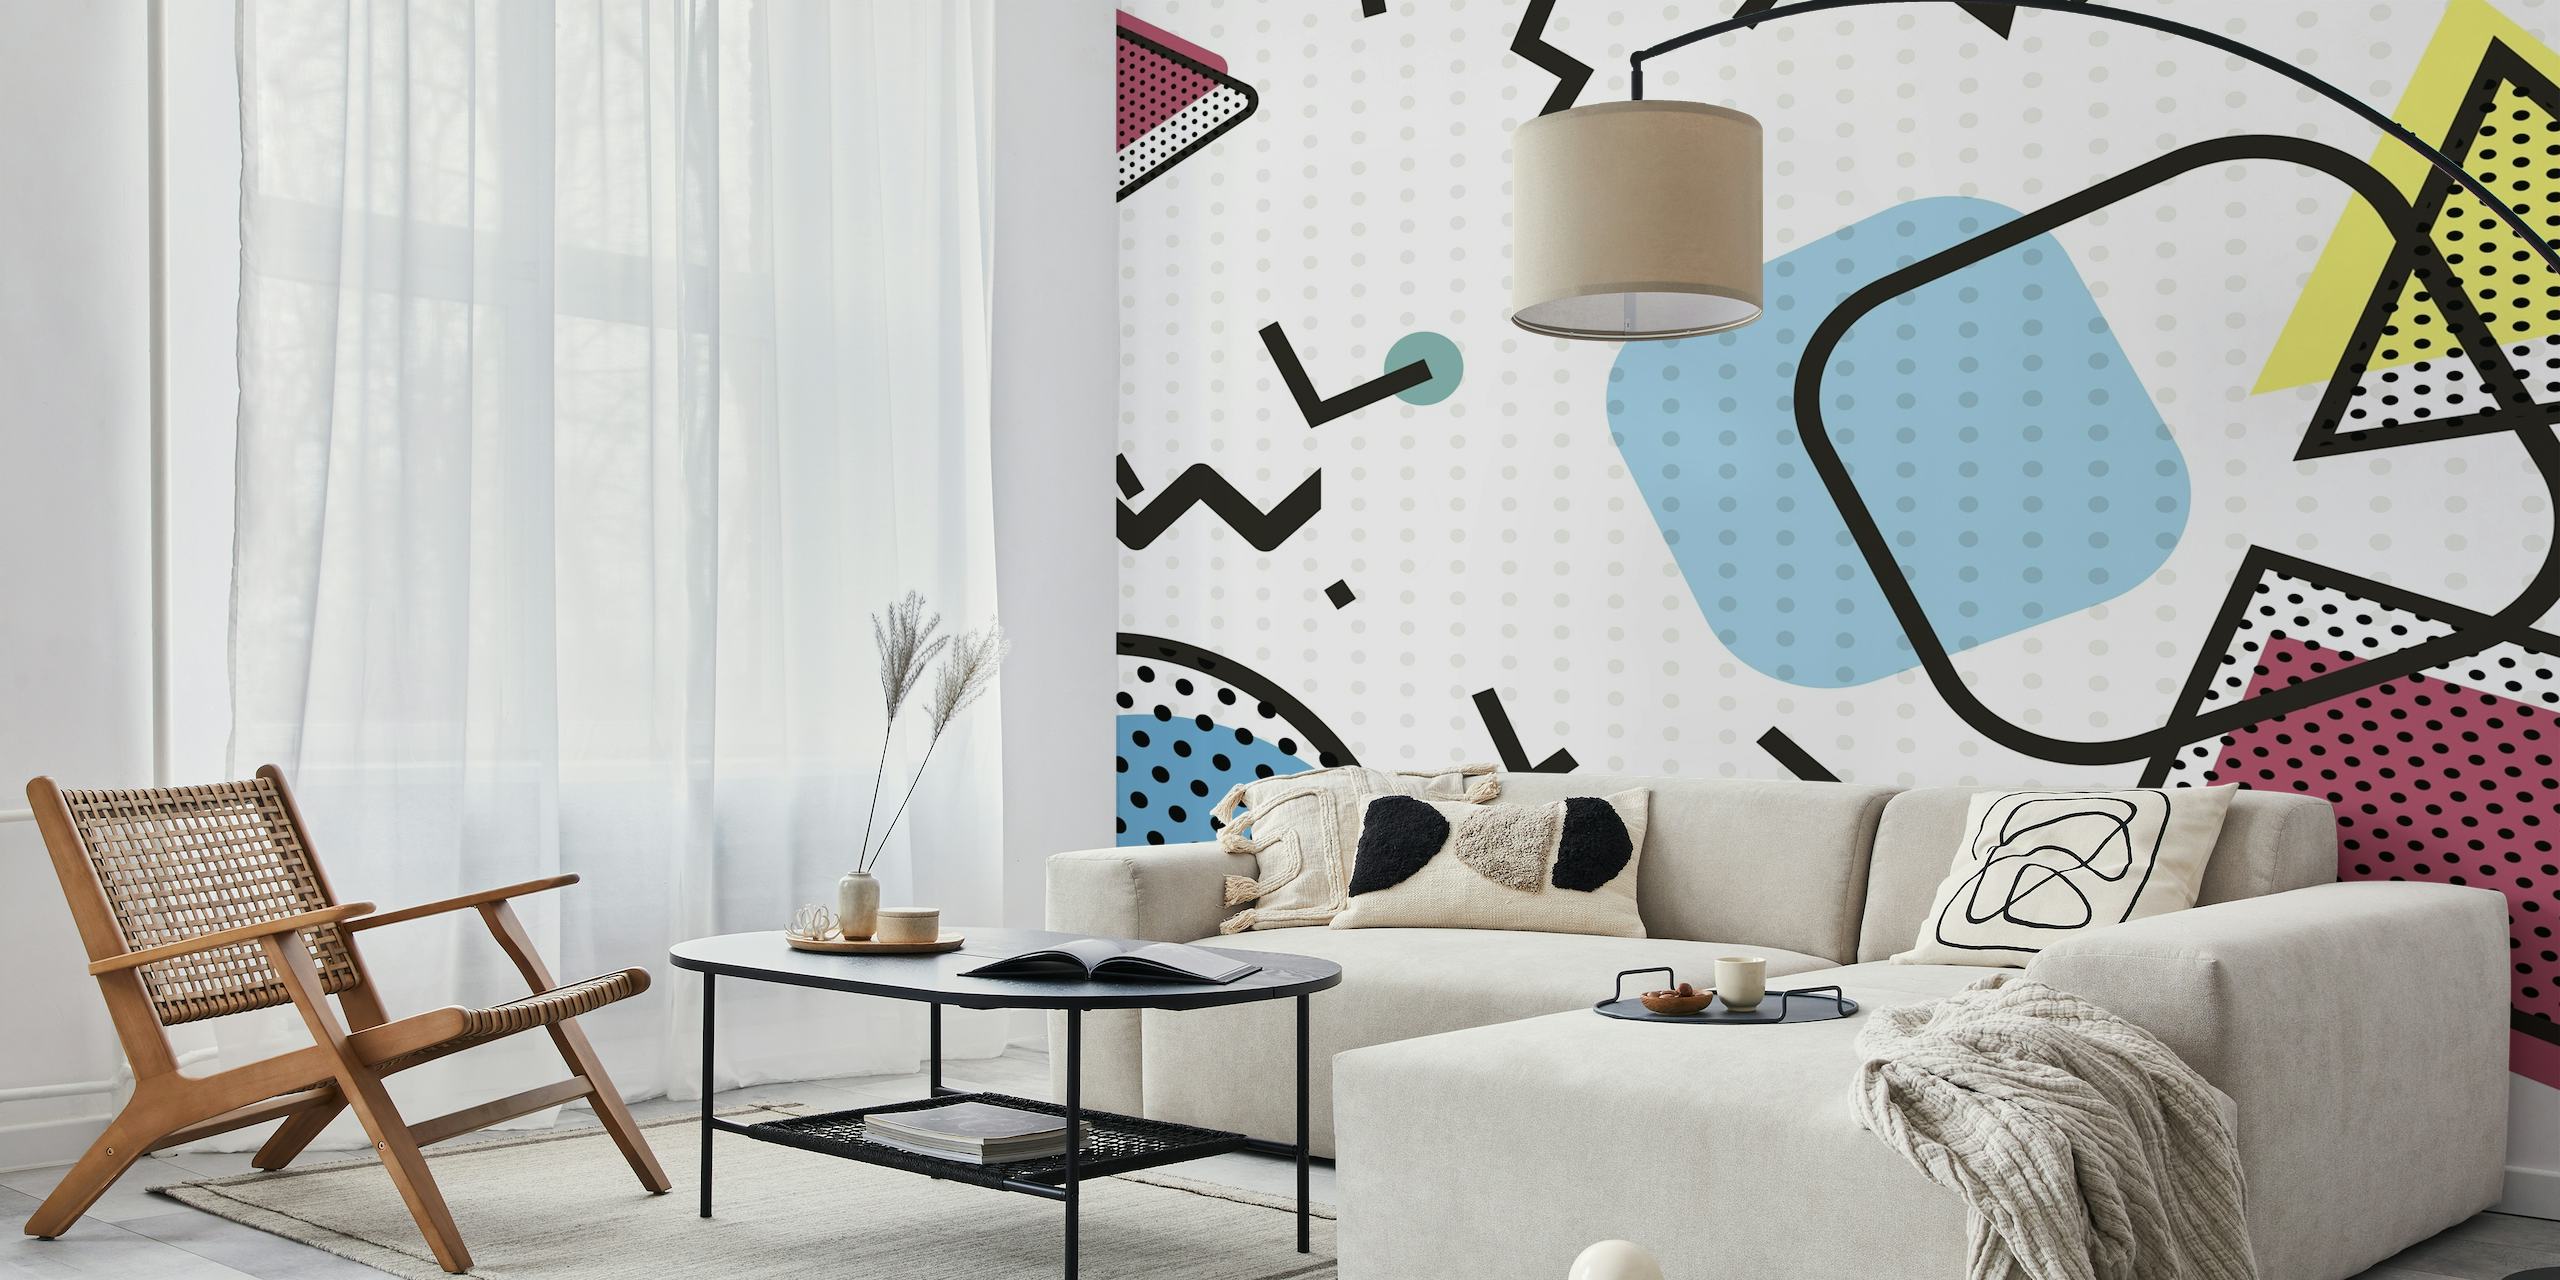 Abstract geometric shapes in a pop-art style wall mural featuring bold colors and vintage designs